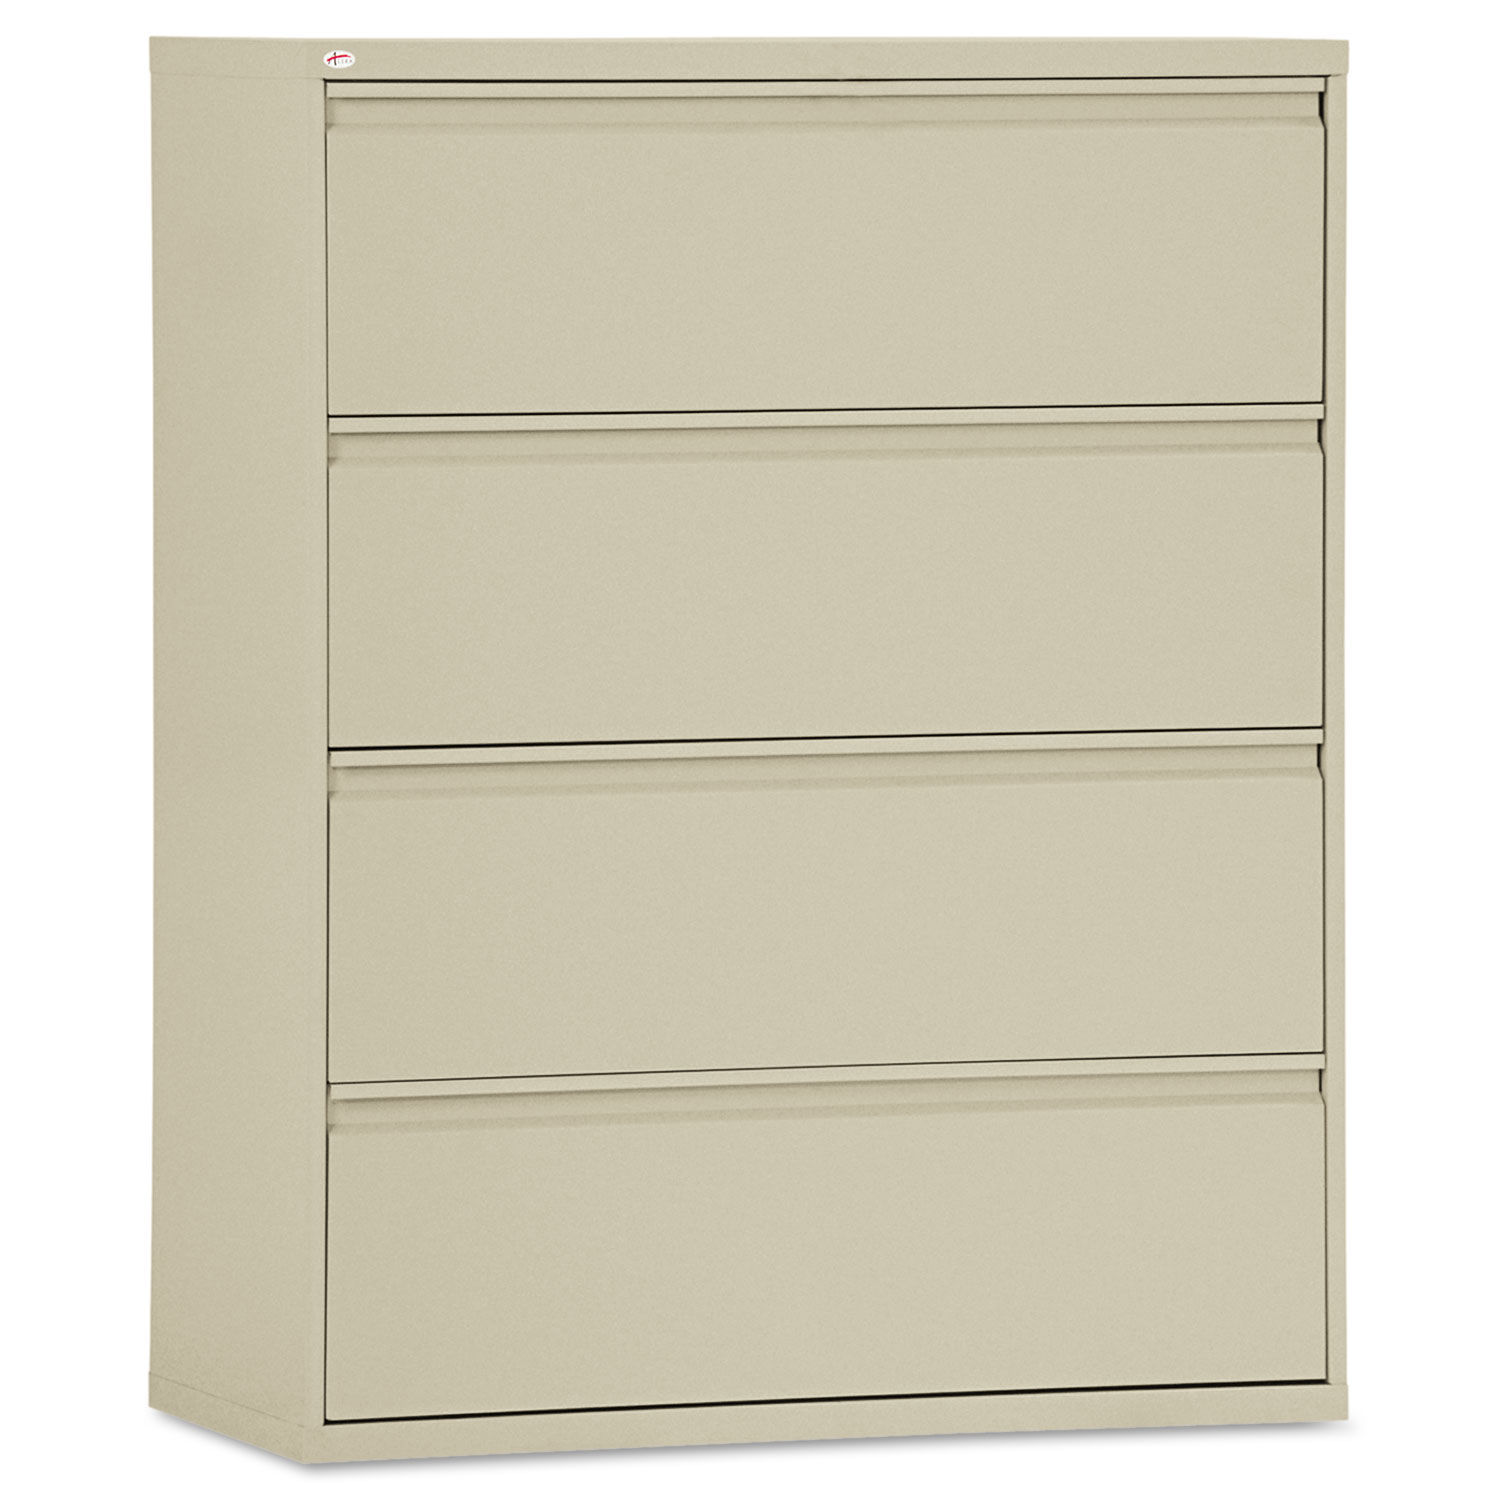 Four Drawer Lateral File Cabinet By Alera Alelf4254py